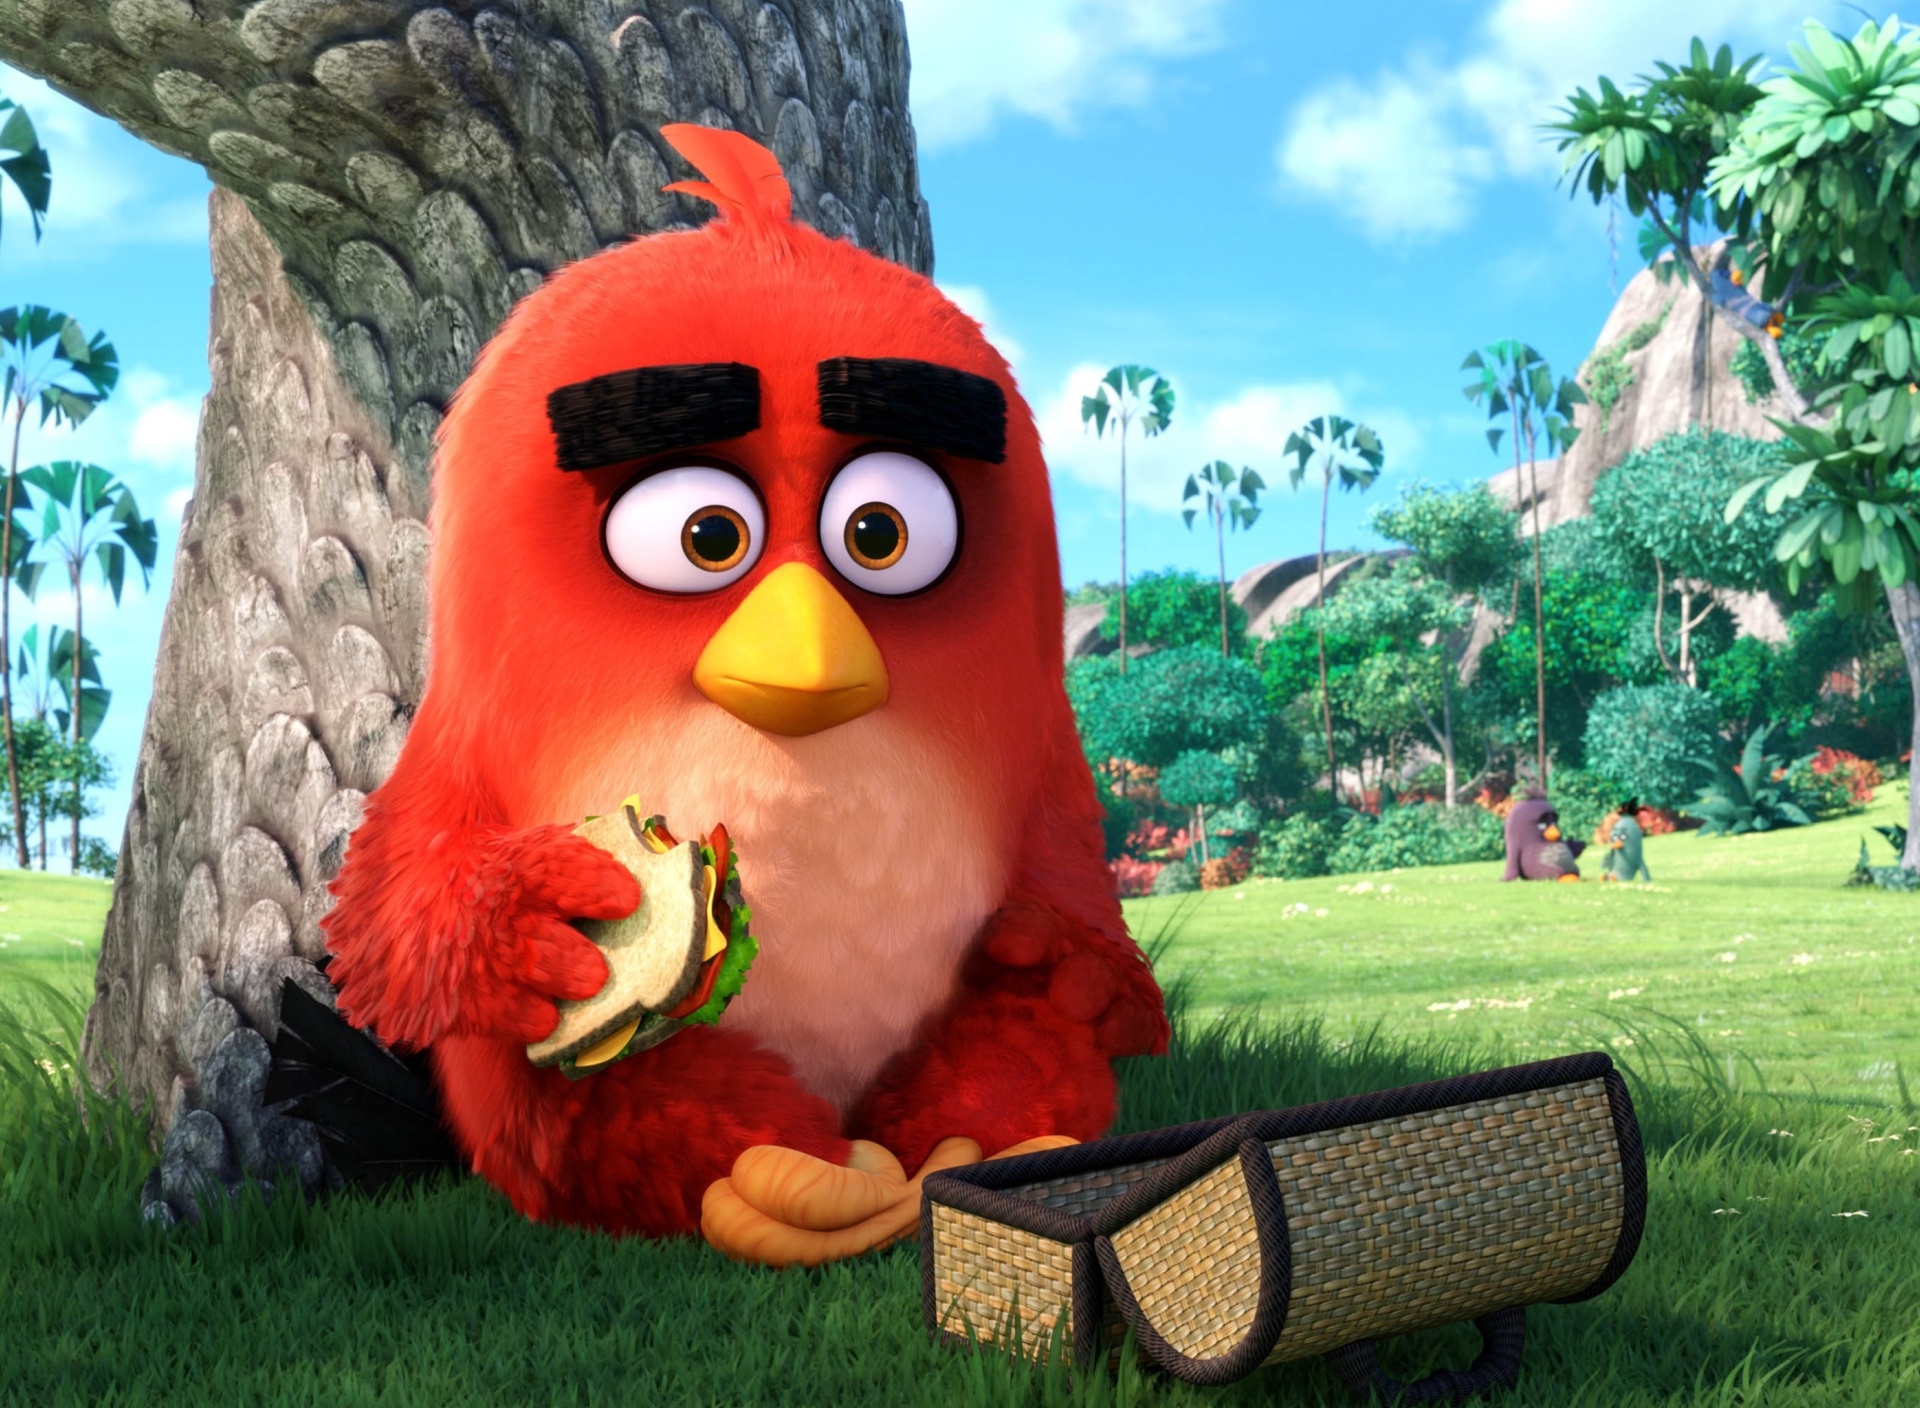 Angry Birds wallpaper 1920x1408